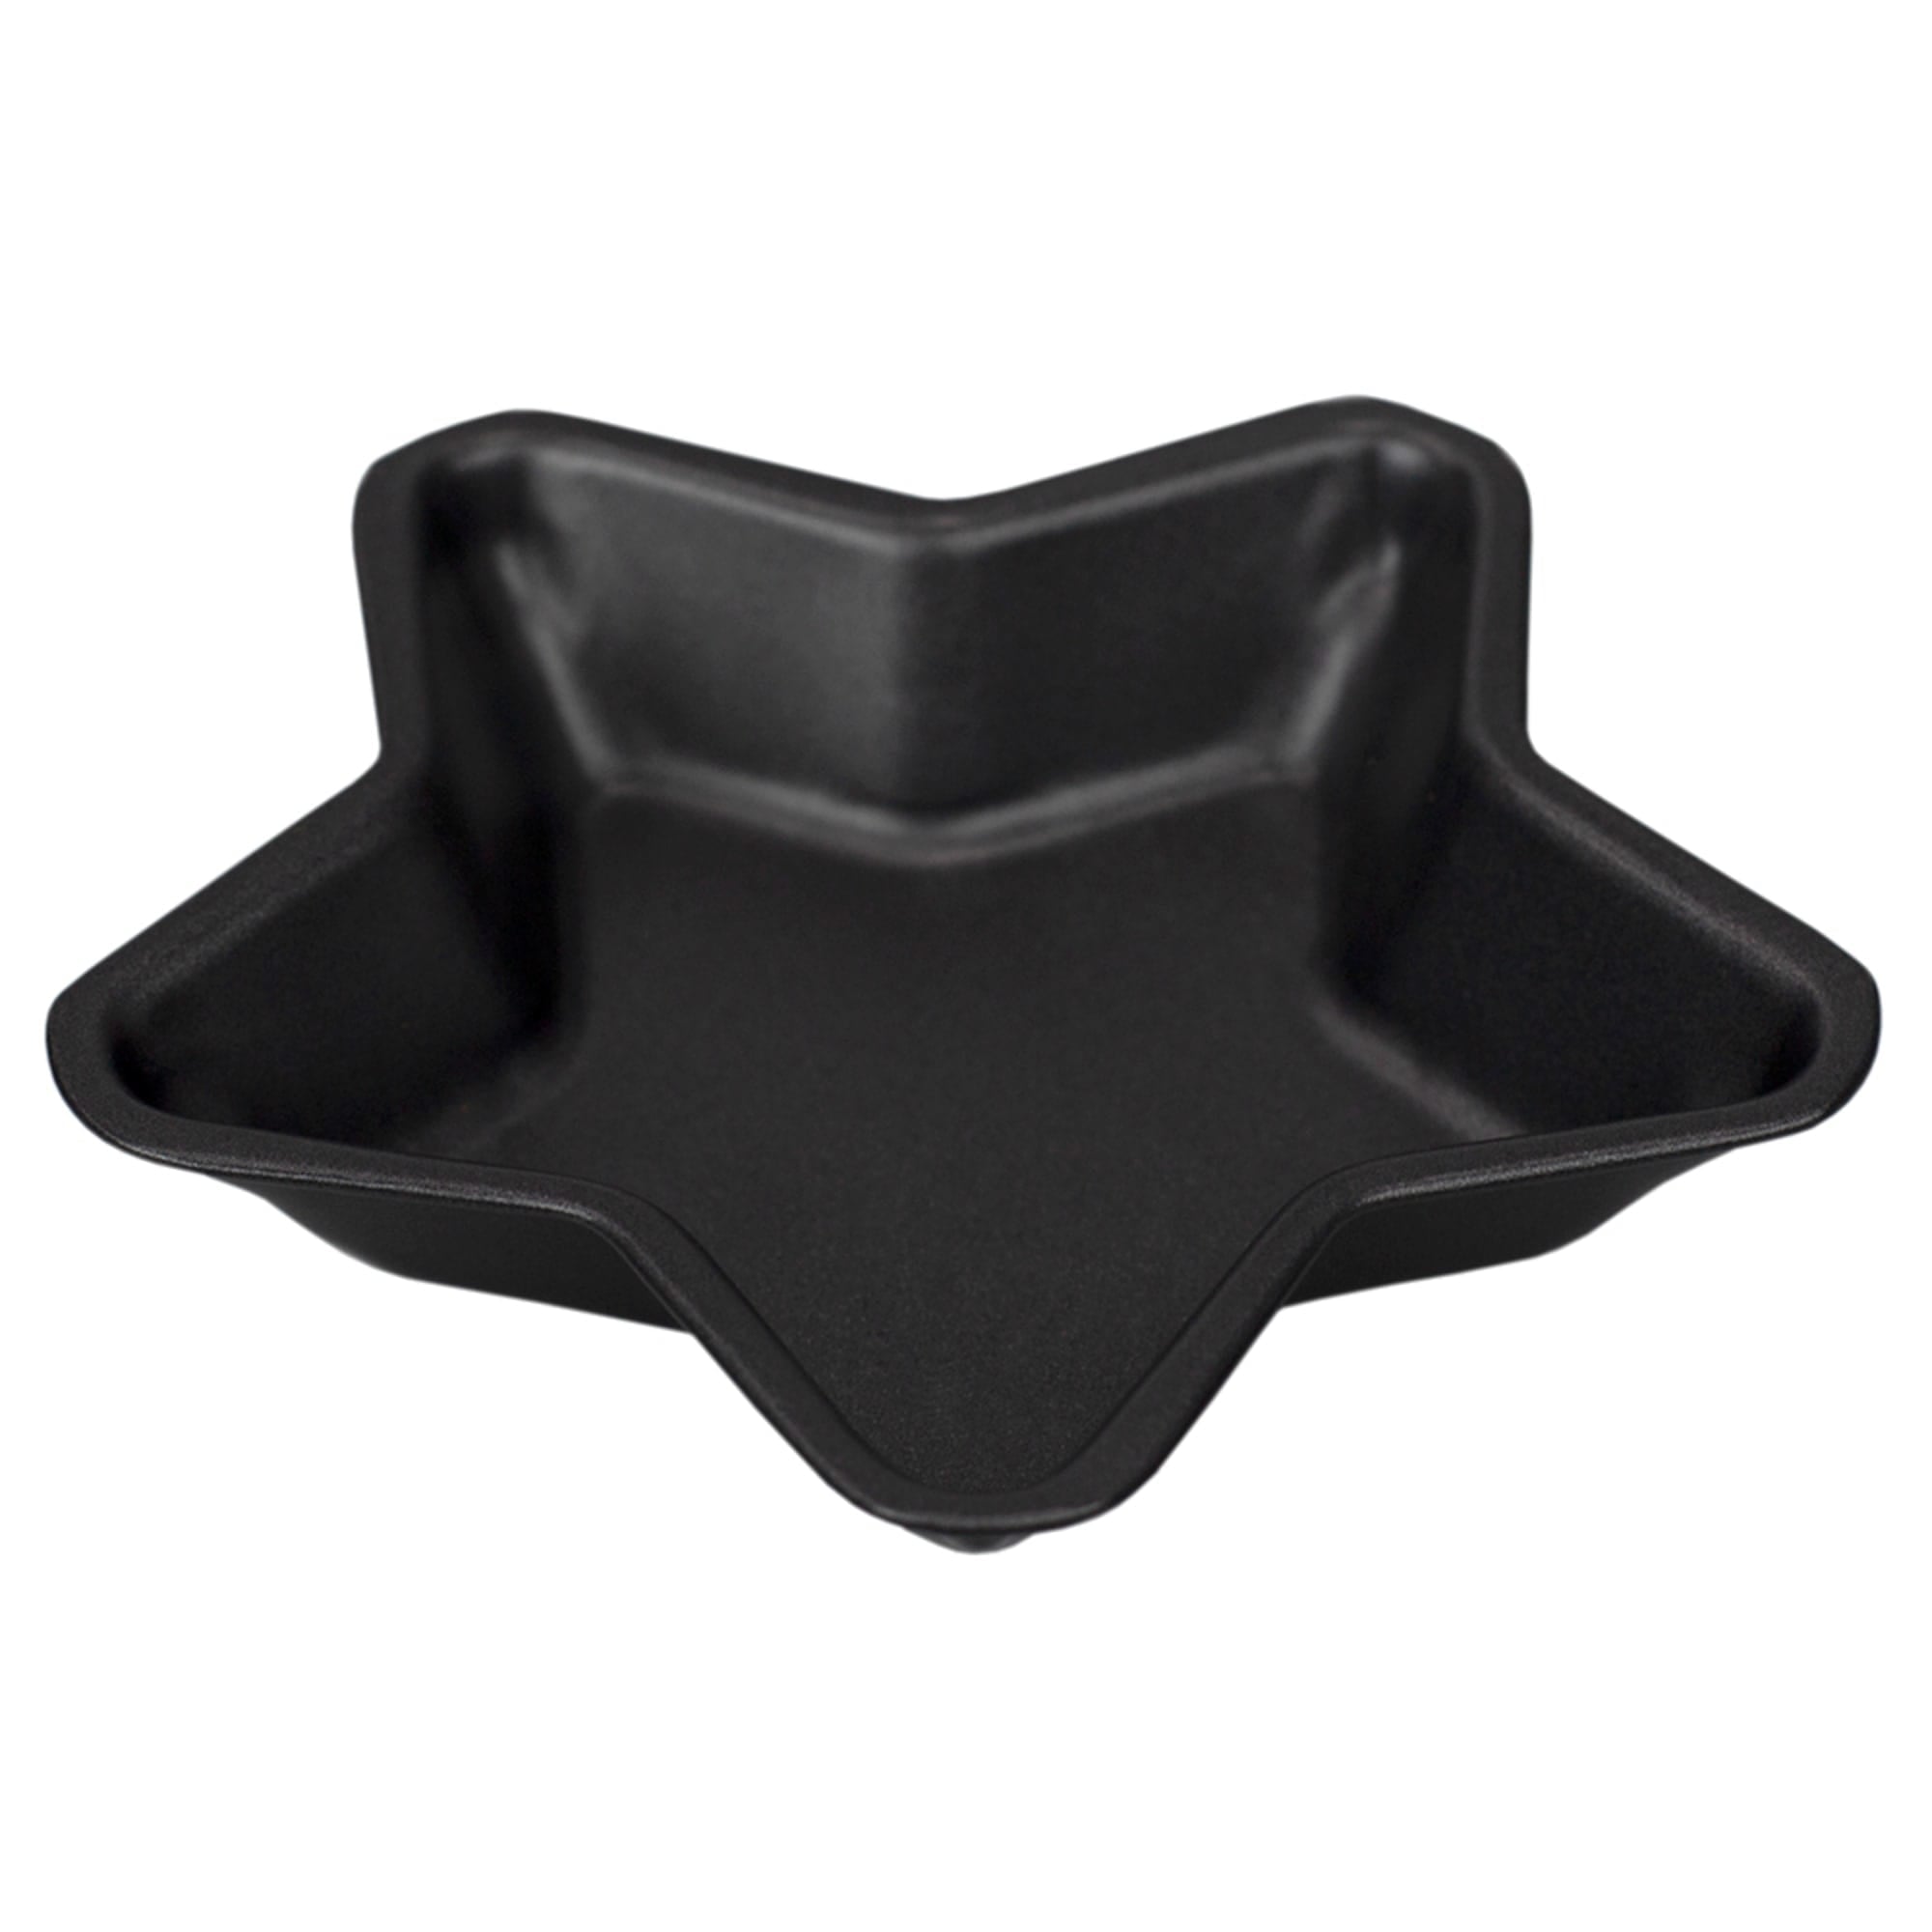 Home Basics Non-Stick Quick Release Steel Mini Bakeware Pan $2.00 EACH, CASE PACK OF 144